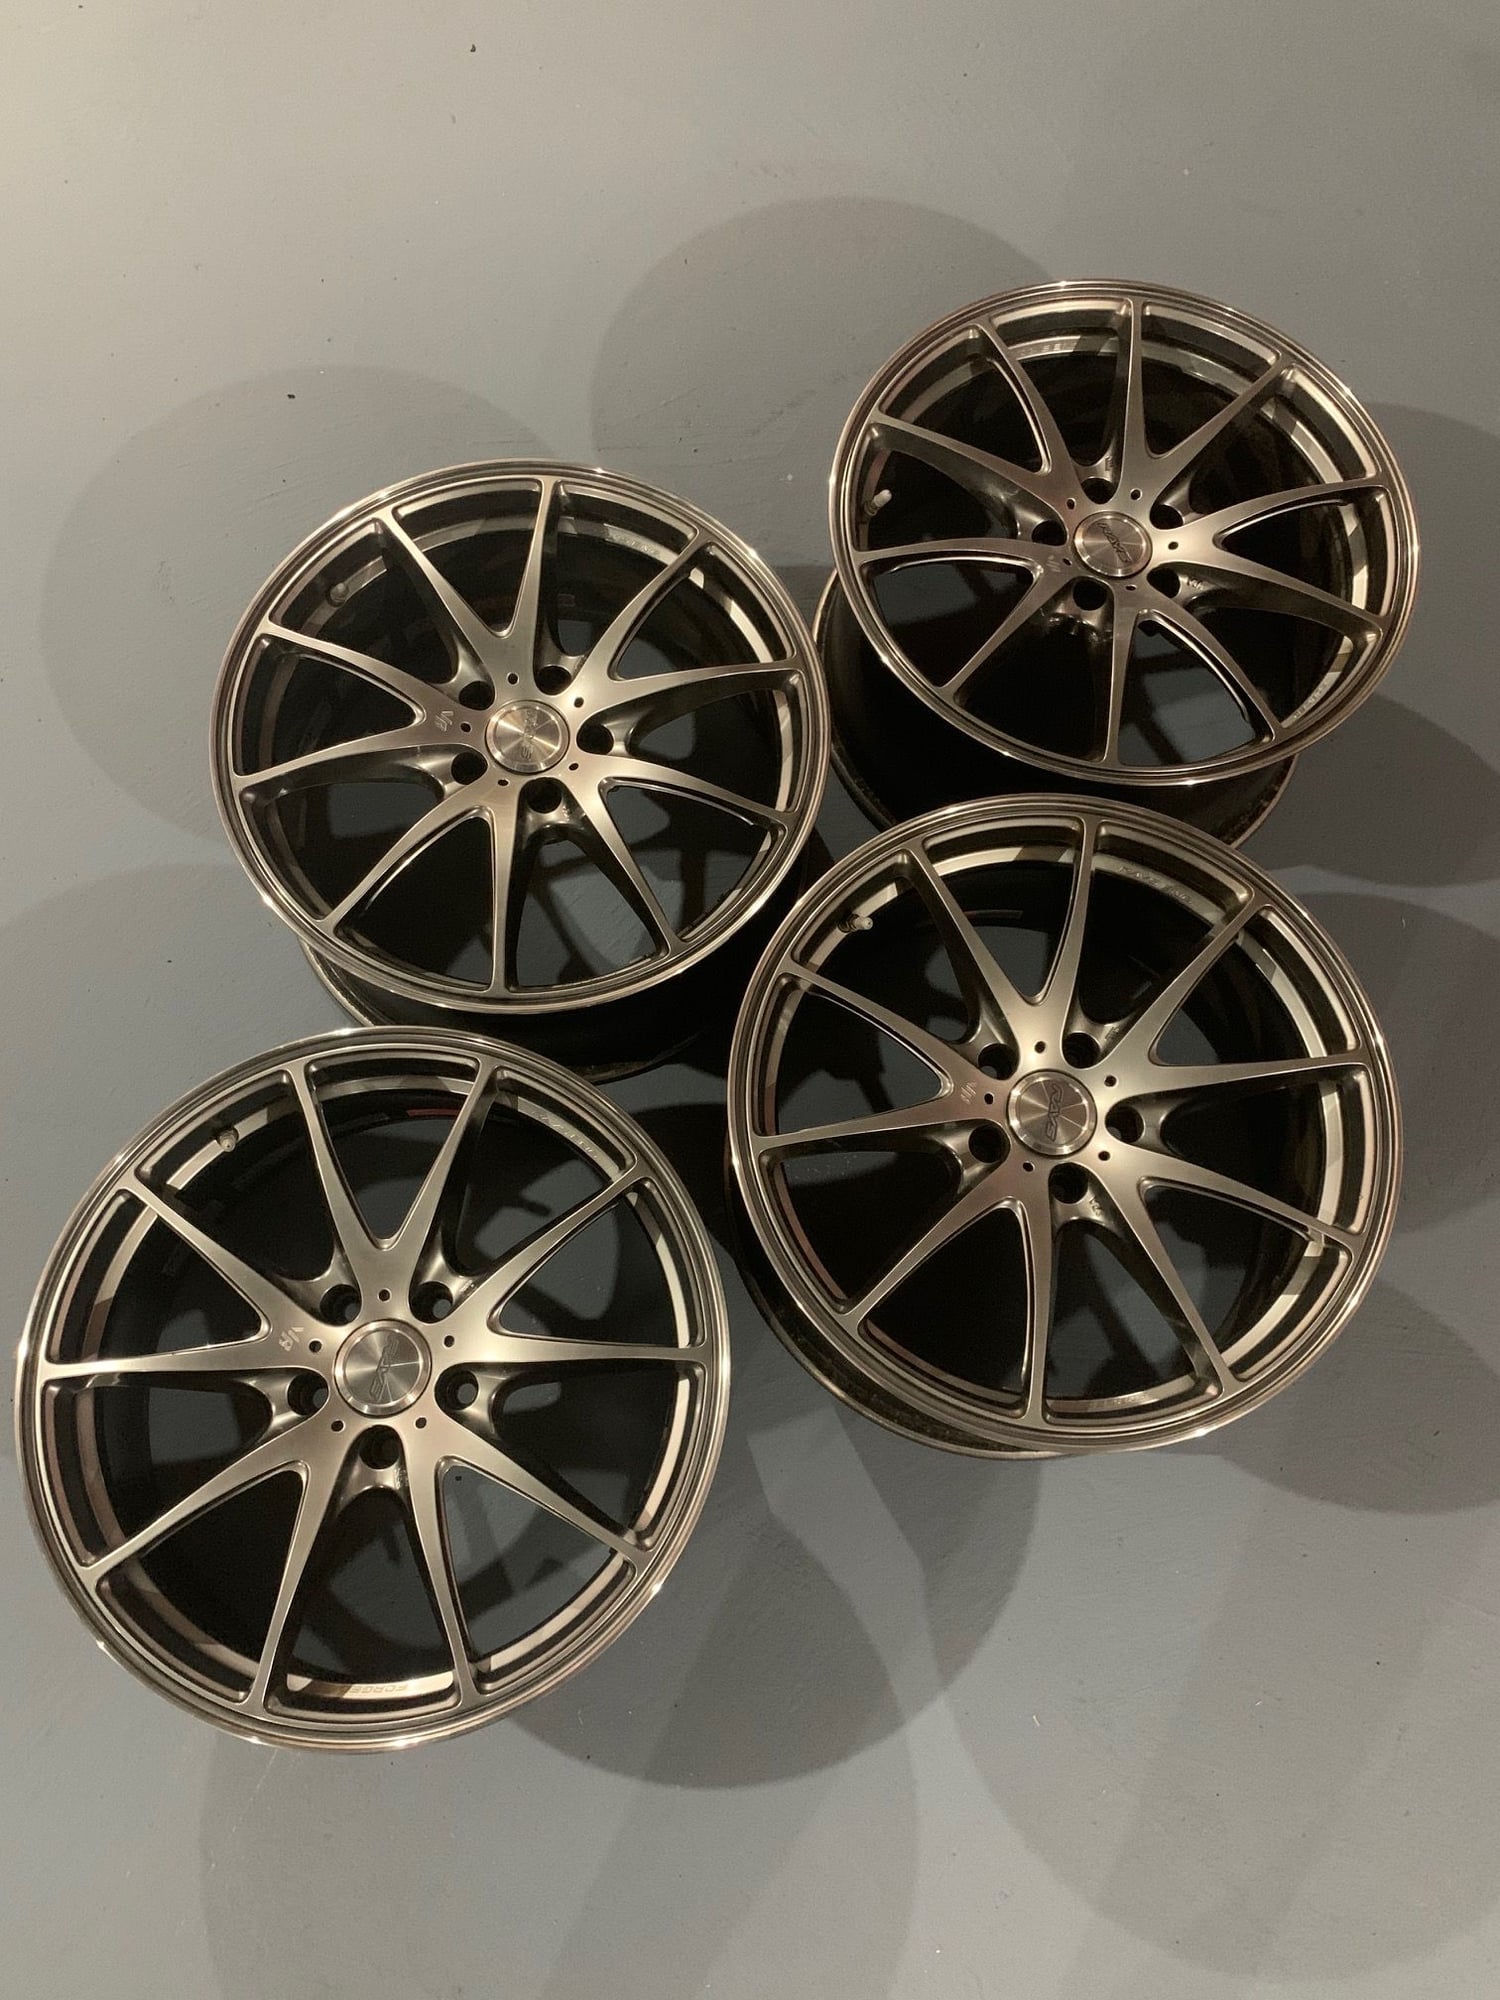 Wheels and Tires/Axles - Volk Racing G25 FORGED - Mercury Silver - 5x112 - 18 x 8 +35 18 x 9 +45 - Used - 0  All Models - Toronto, ON L4G1A6, Canada